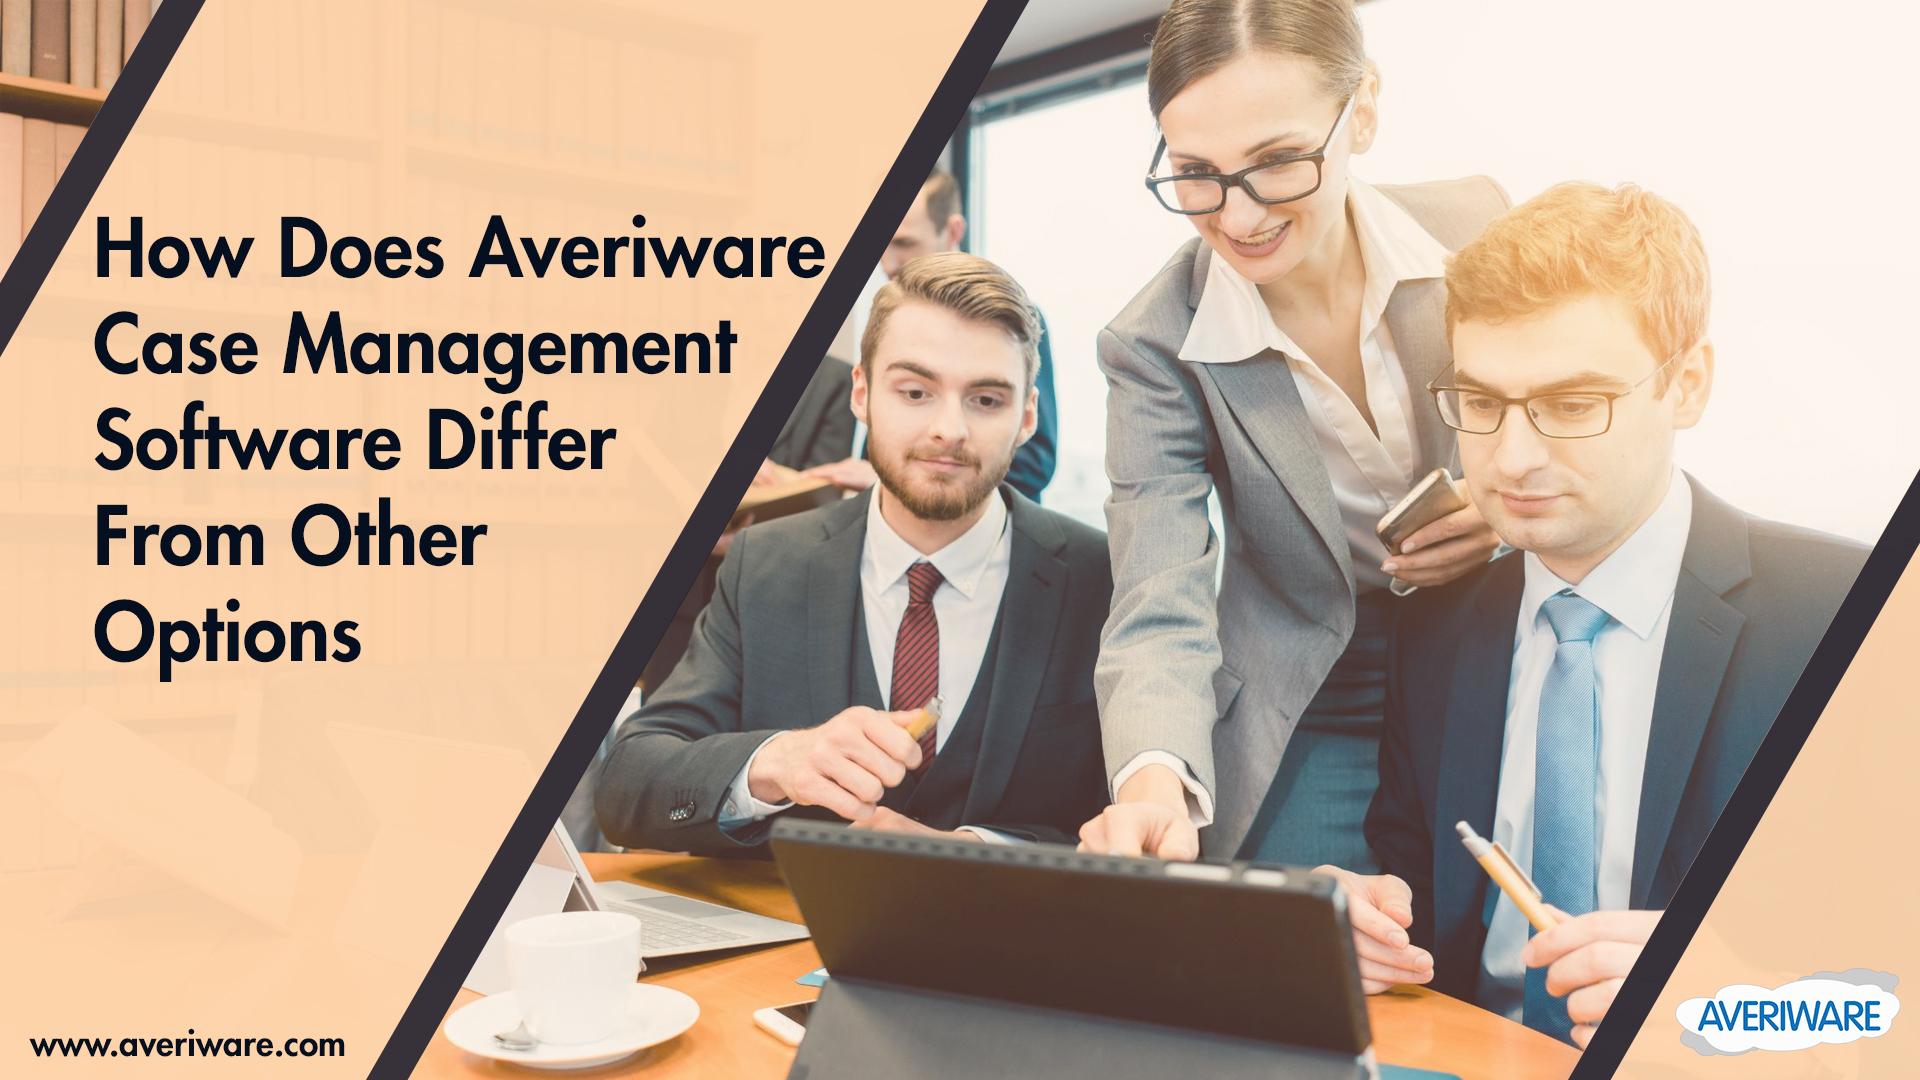 How Averiware Case Management Software Differs from Other Options